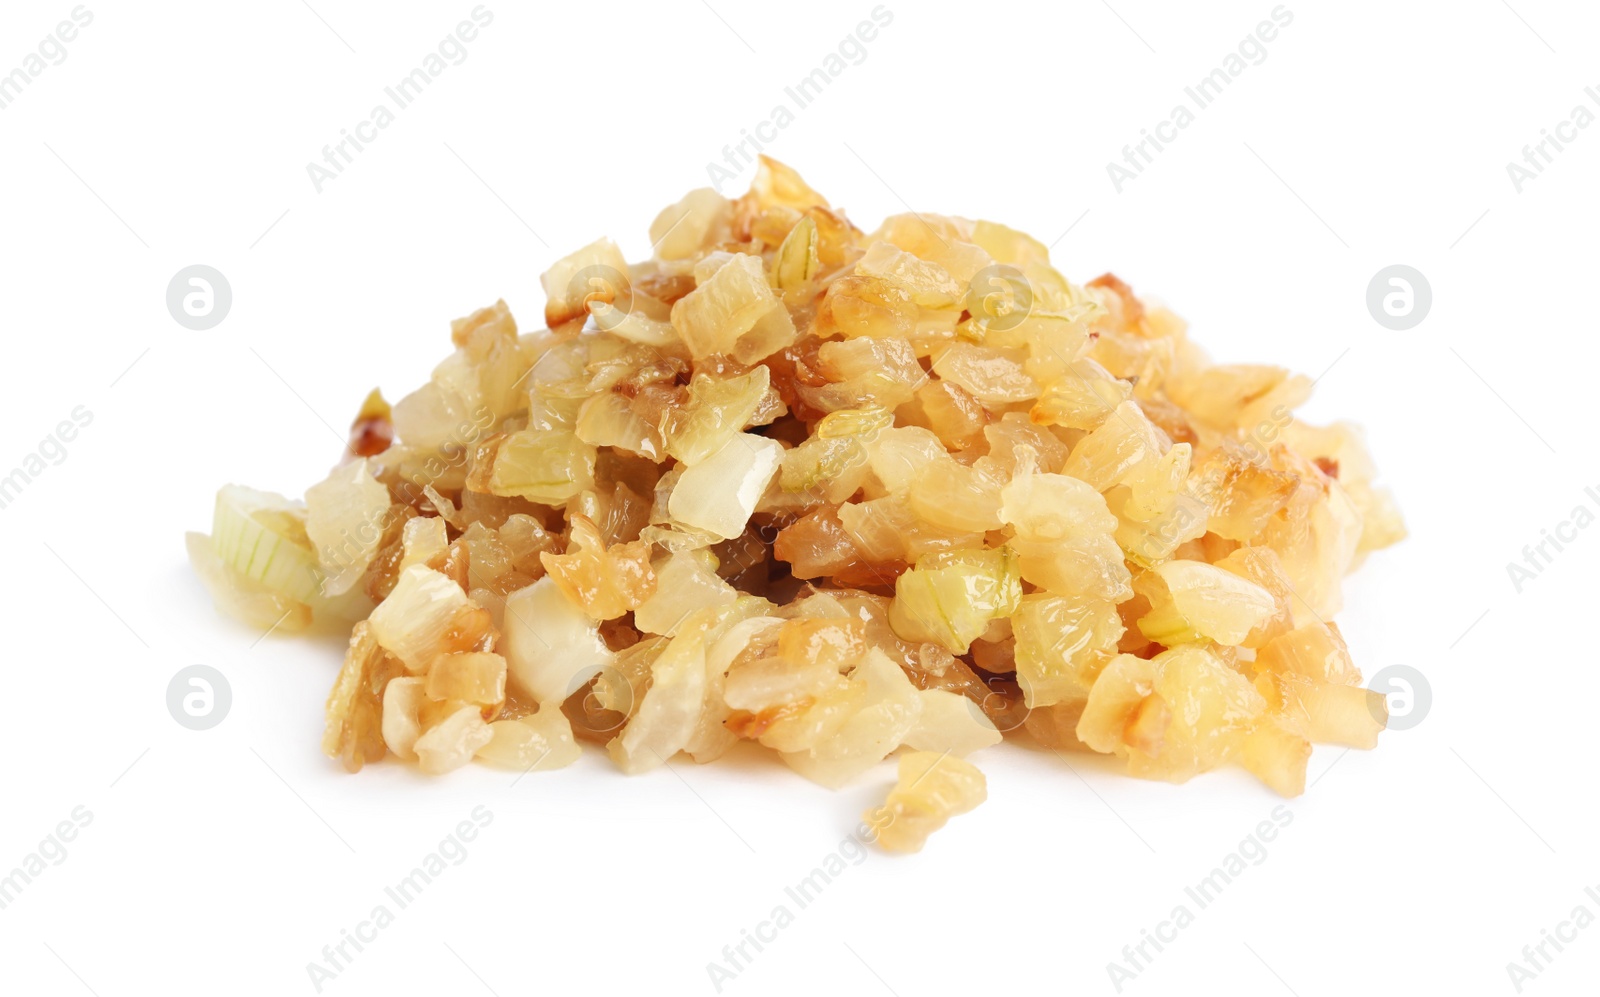 Photo of Pile of tasty fried onion isolated on white